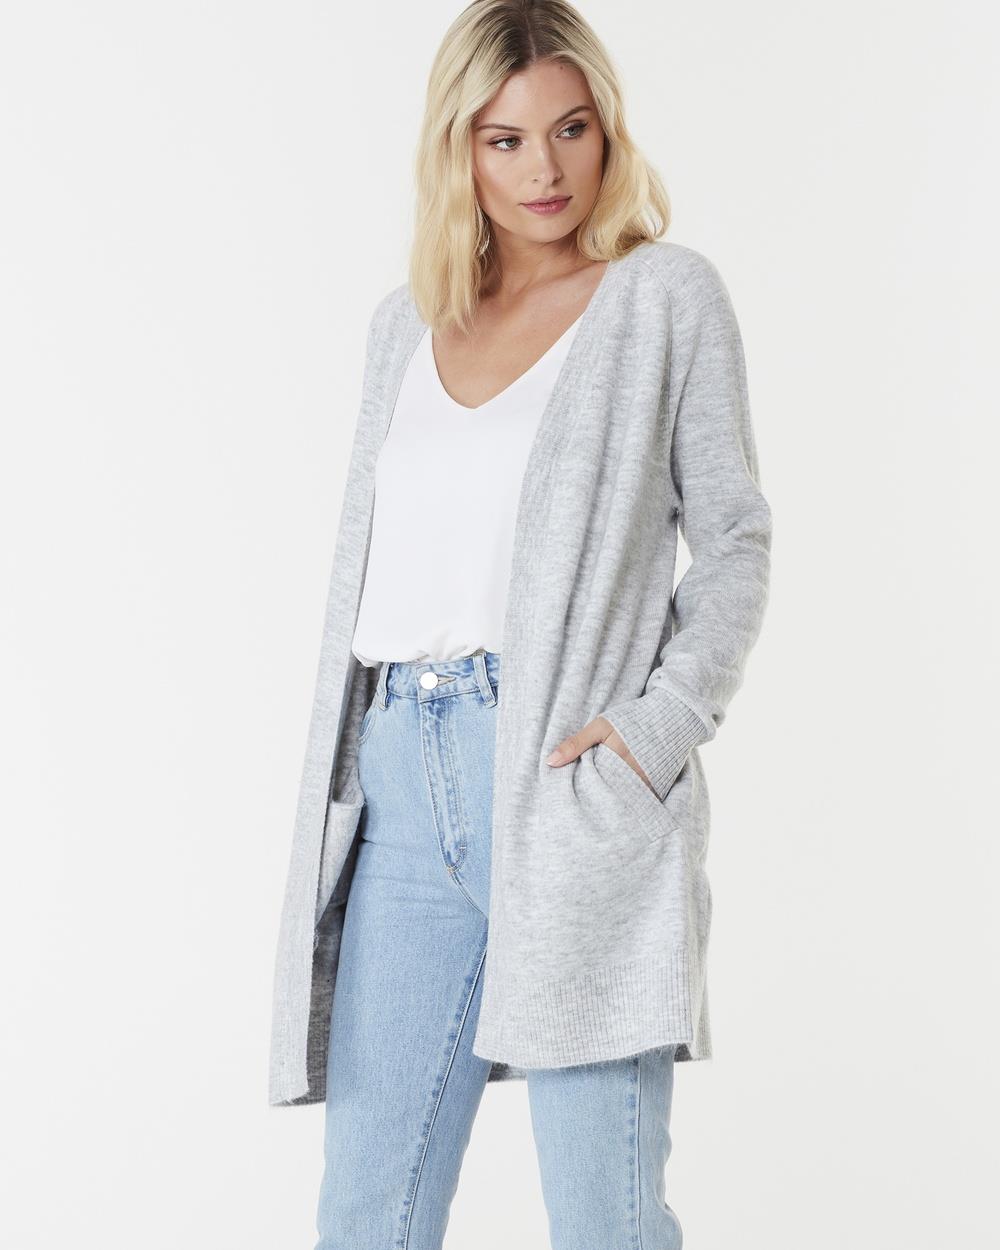 Everly Collective - Brooklyn Short Cardigan - Jumpers & Cardigans (Light Grey) Brooklyn Short Cardigan